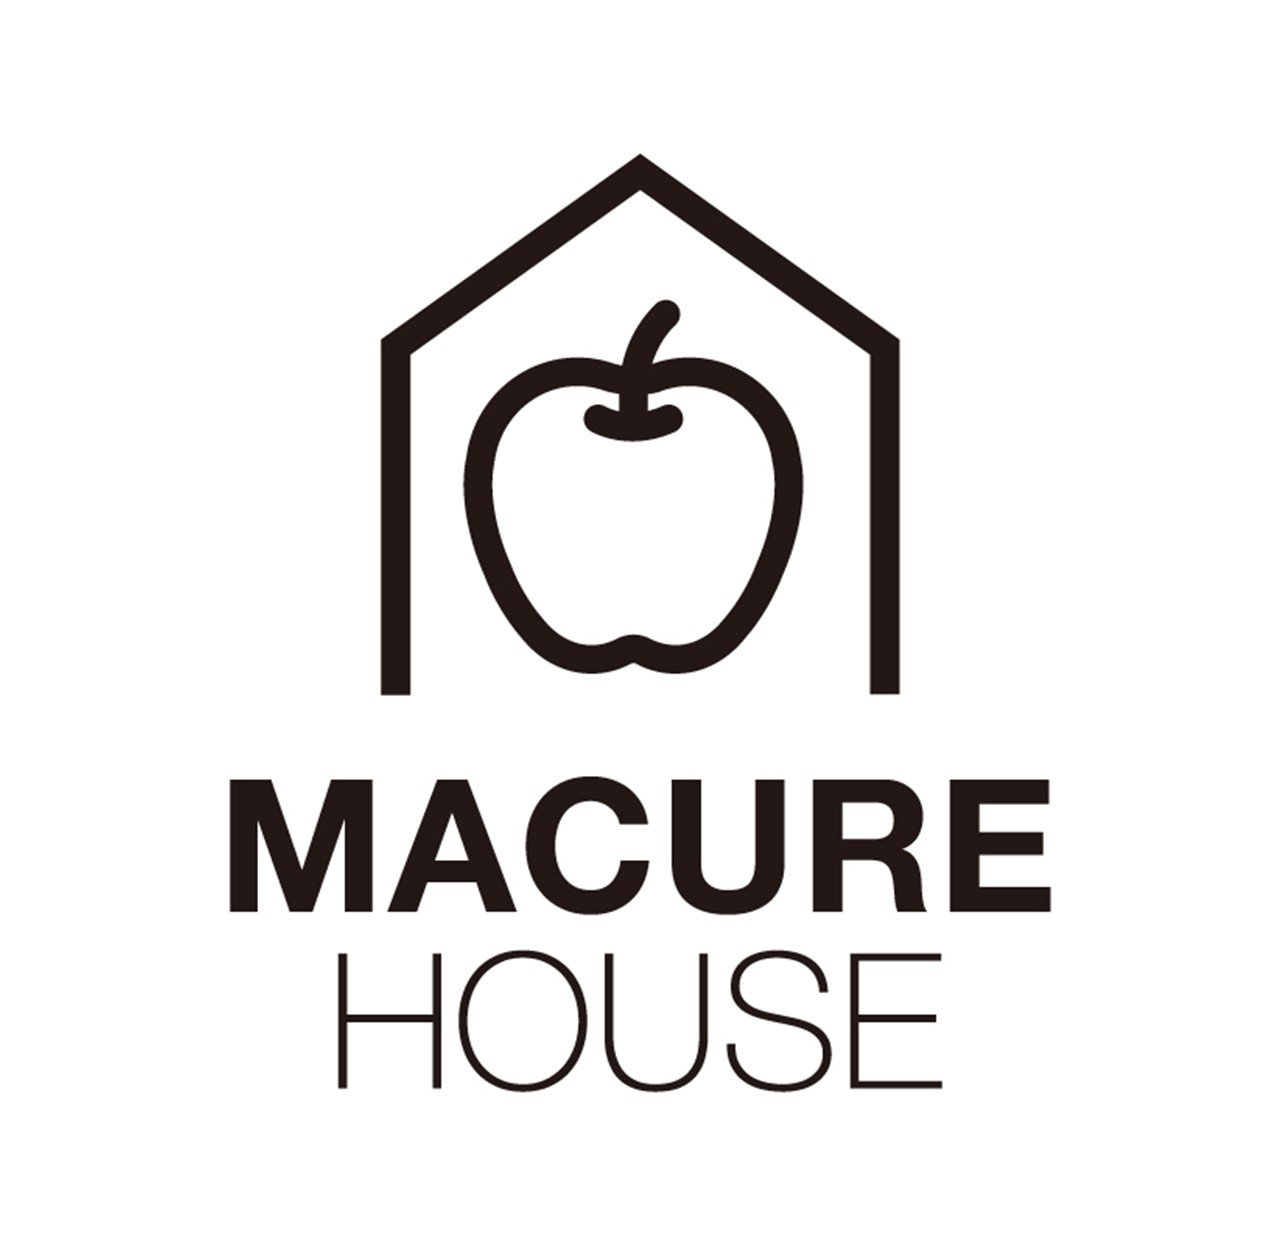 MACURE HOUSE